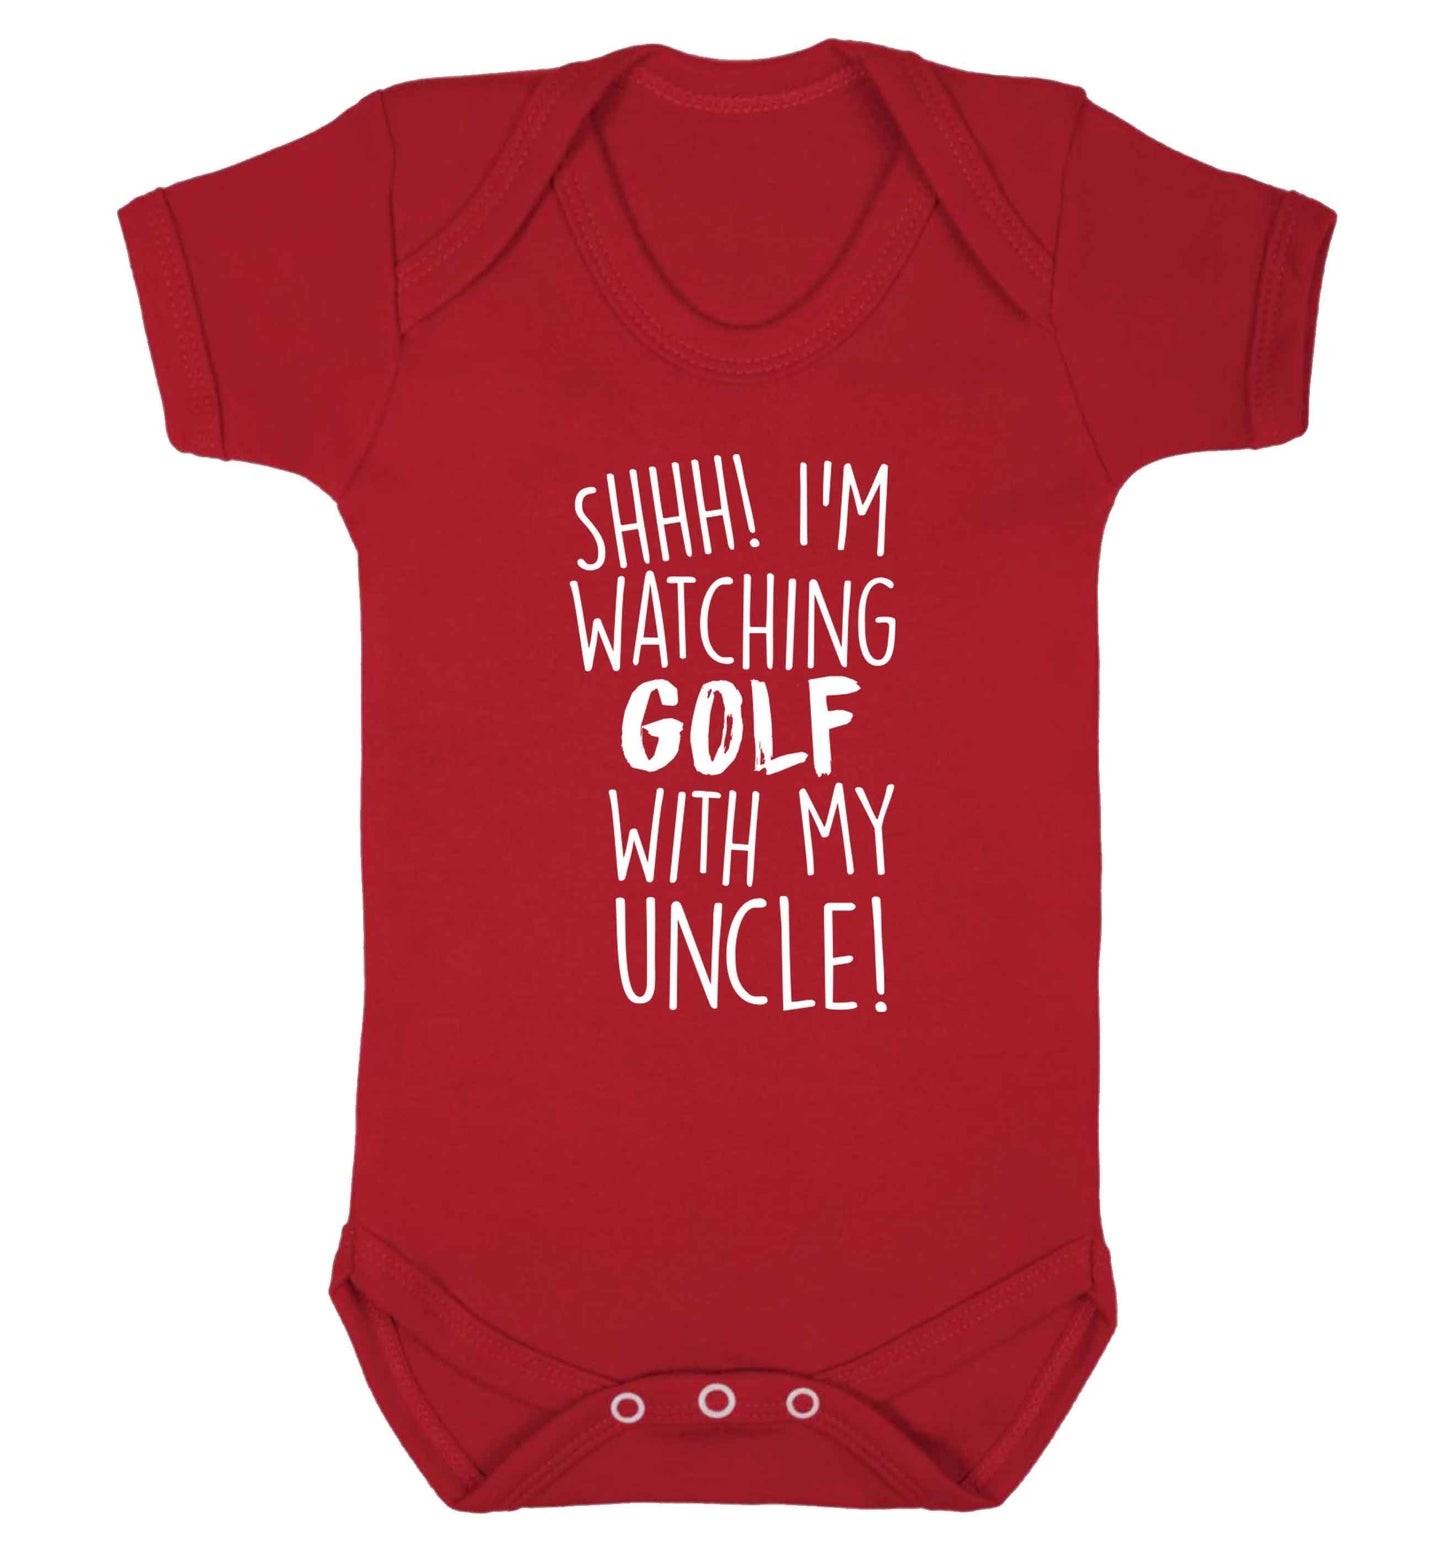 Shh I'm watching golf with my uncle Baby Vest red 18-24 months